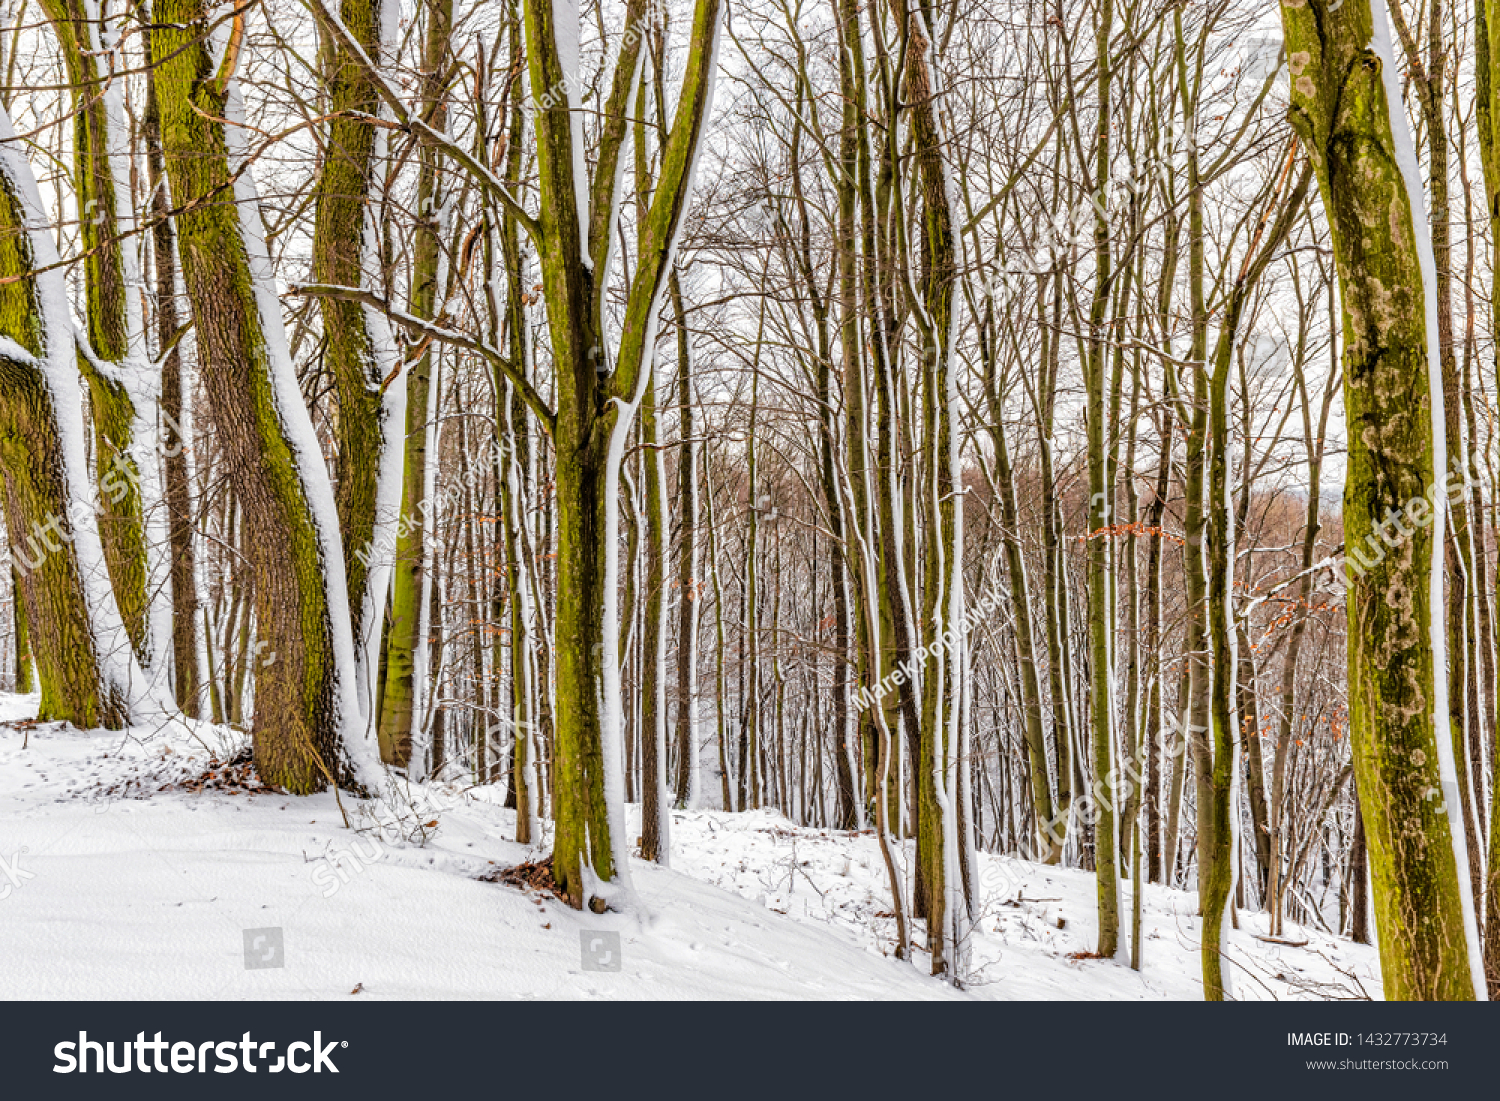 Beautiful winter landscape in the snowy forest, a trip to the south Poland in January. #1432773734